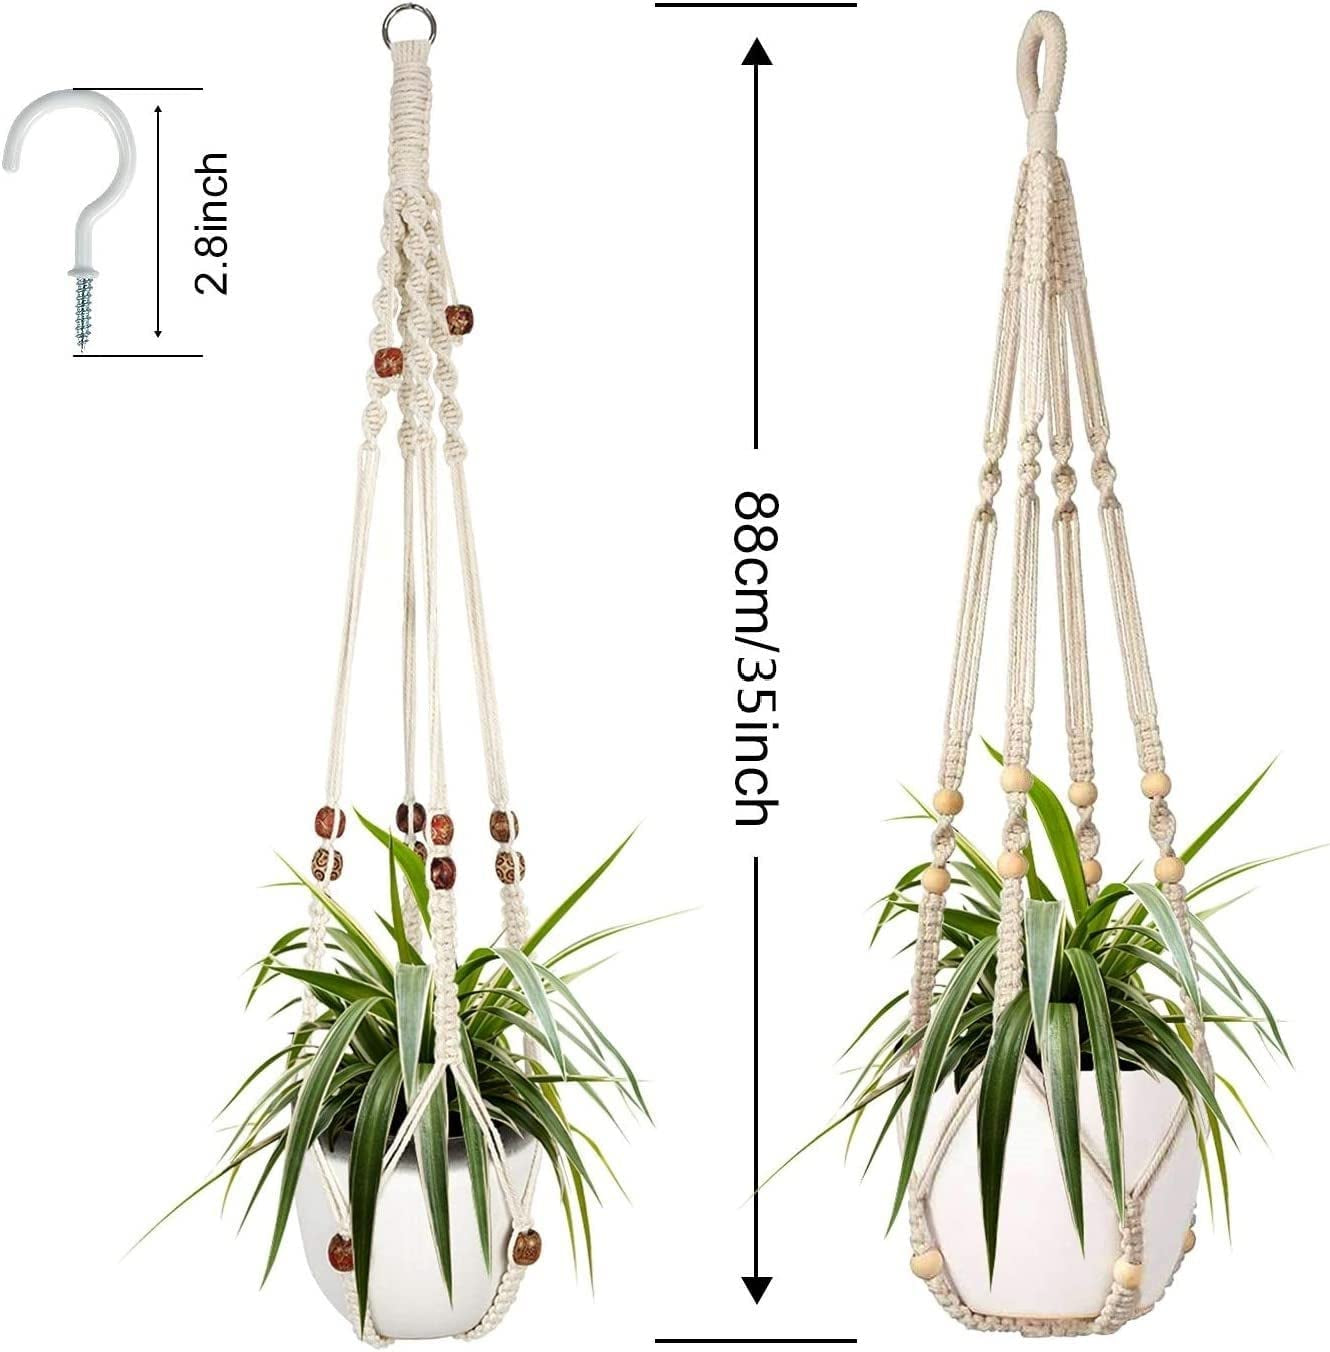 2 Packs Macrame Plant Hangers, Indoor Hanging Planter Basket with Wood Beads Decorative Macrame Pot Hanger for Home Decor with 4 Hooks